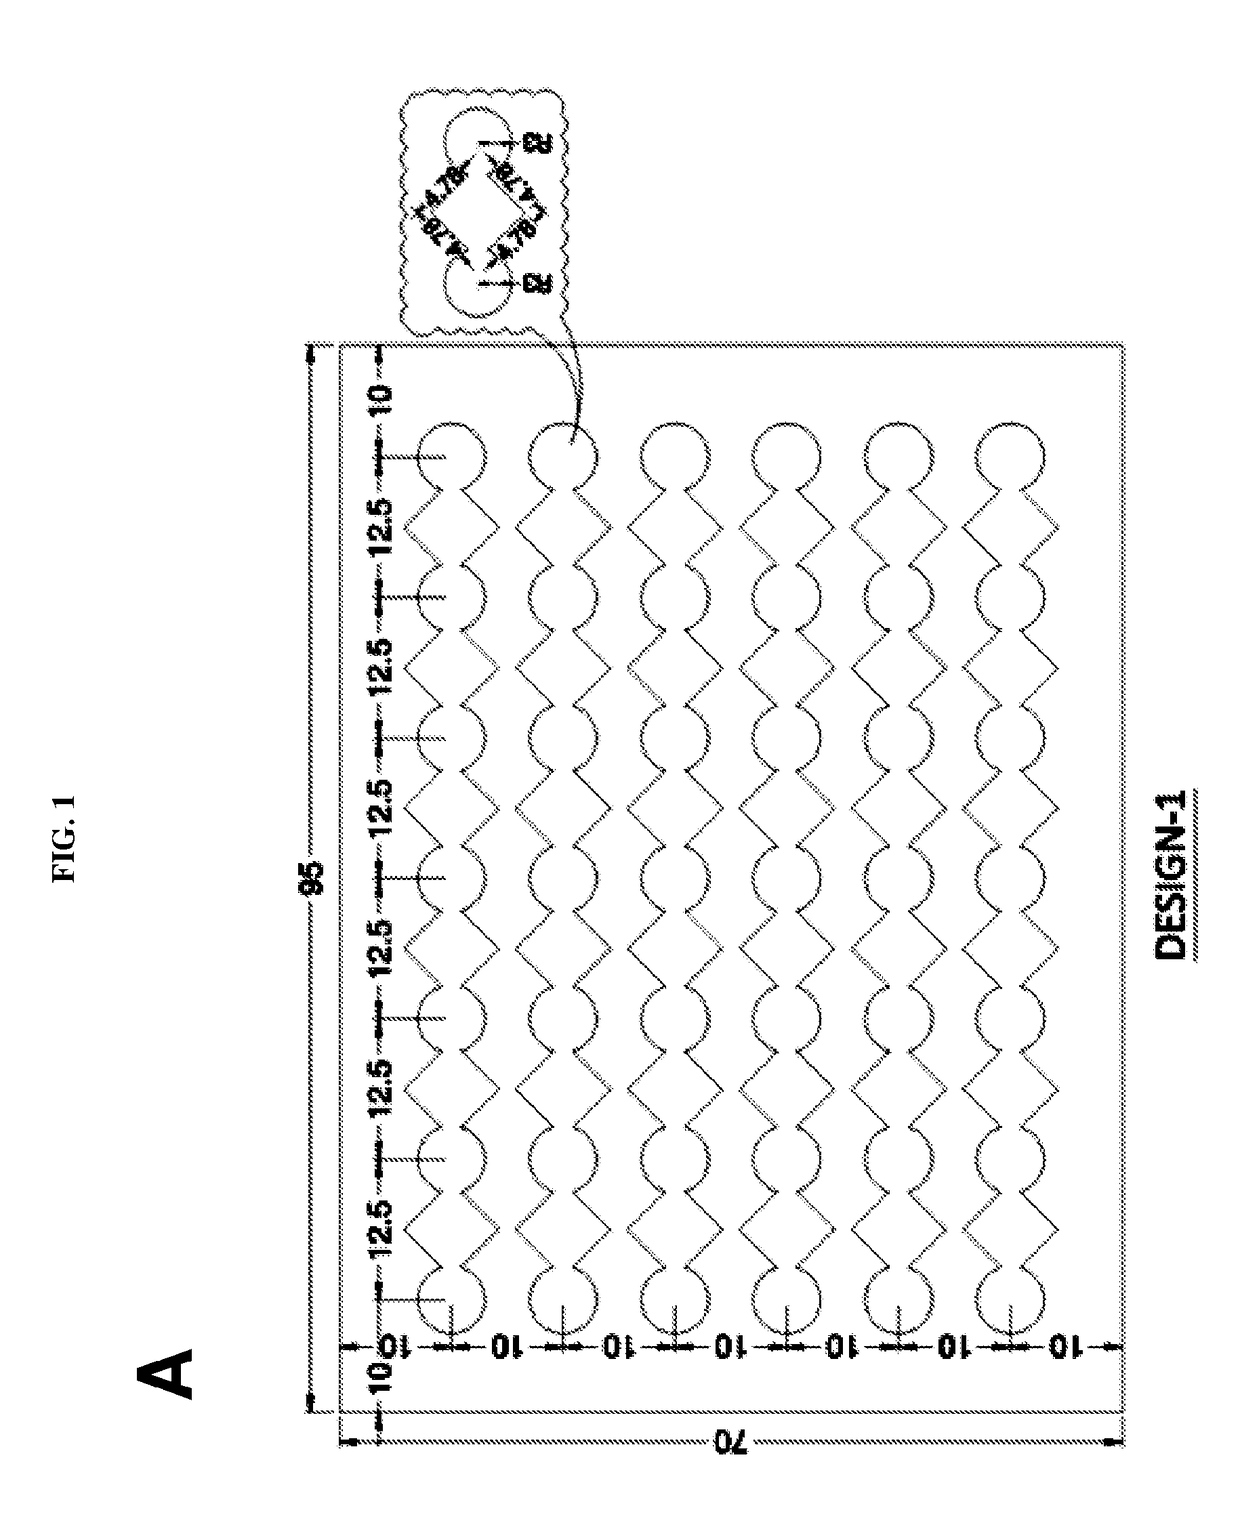 Novel design of enzyme-linked immunosorbent assay plates and systems and methods of use thereof